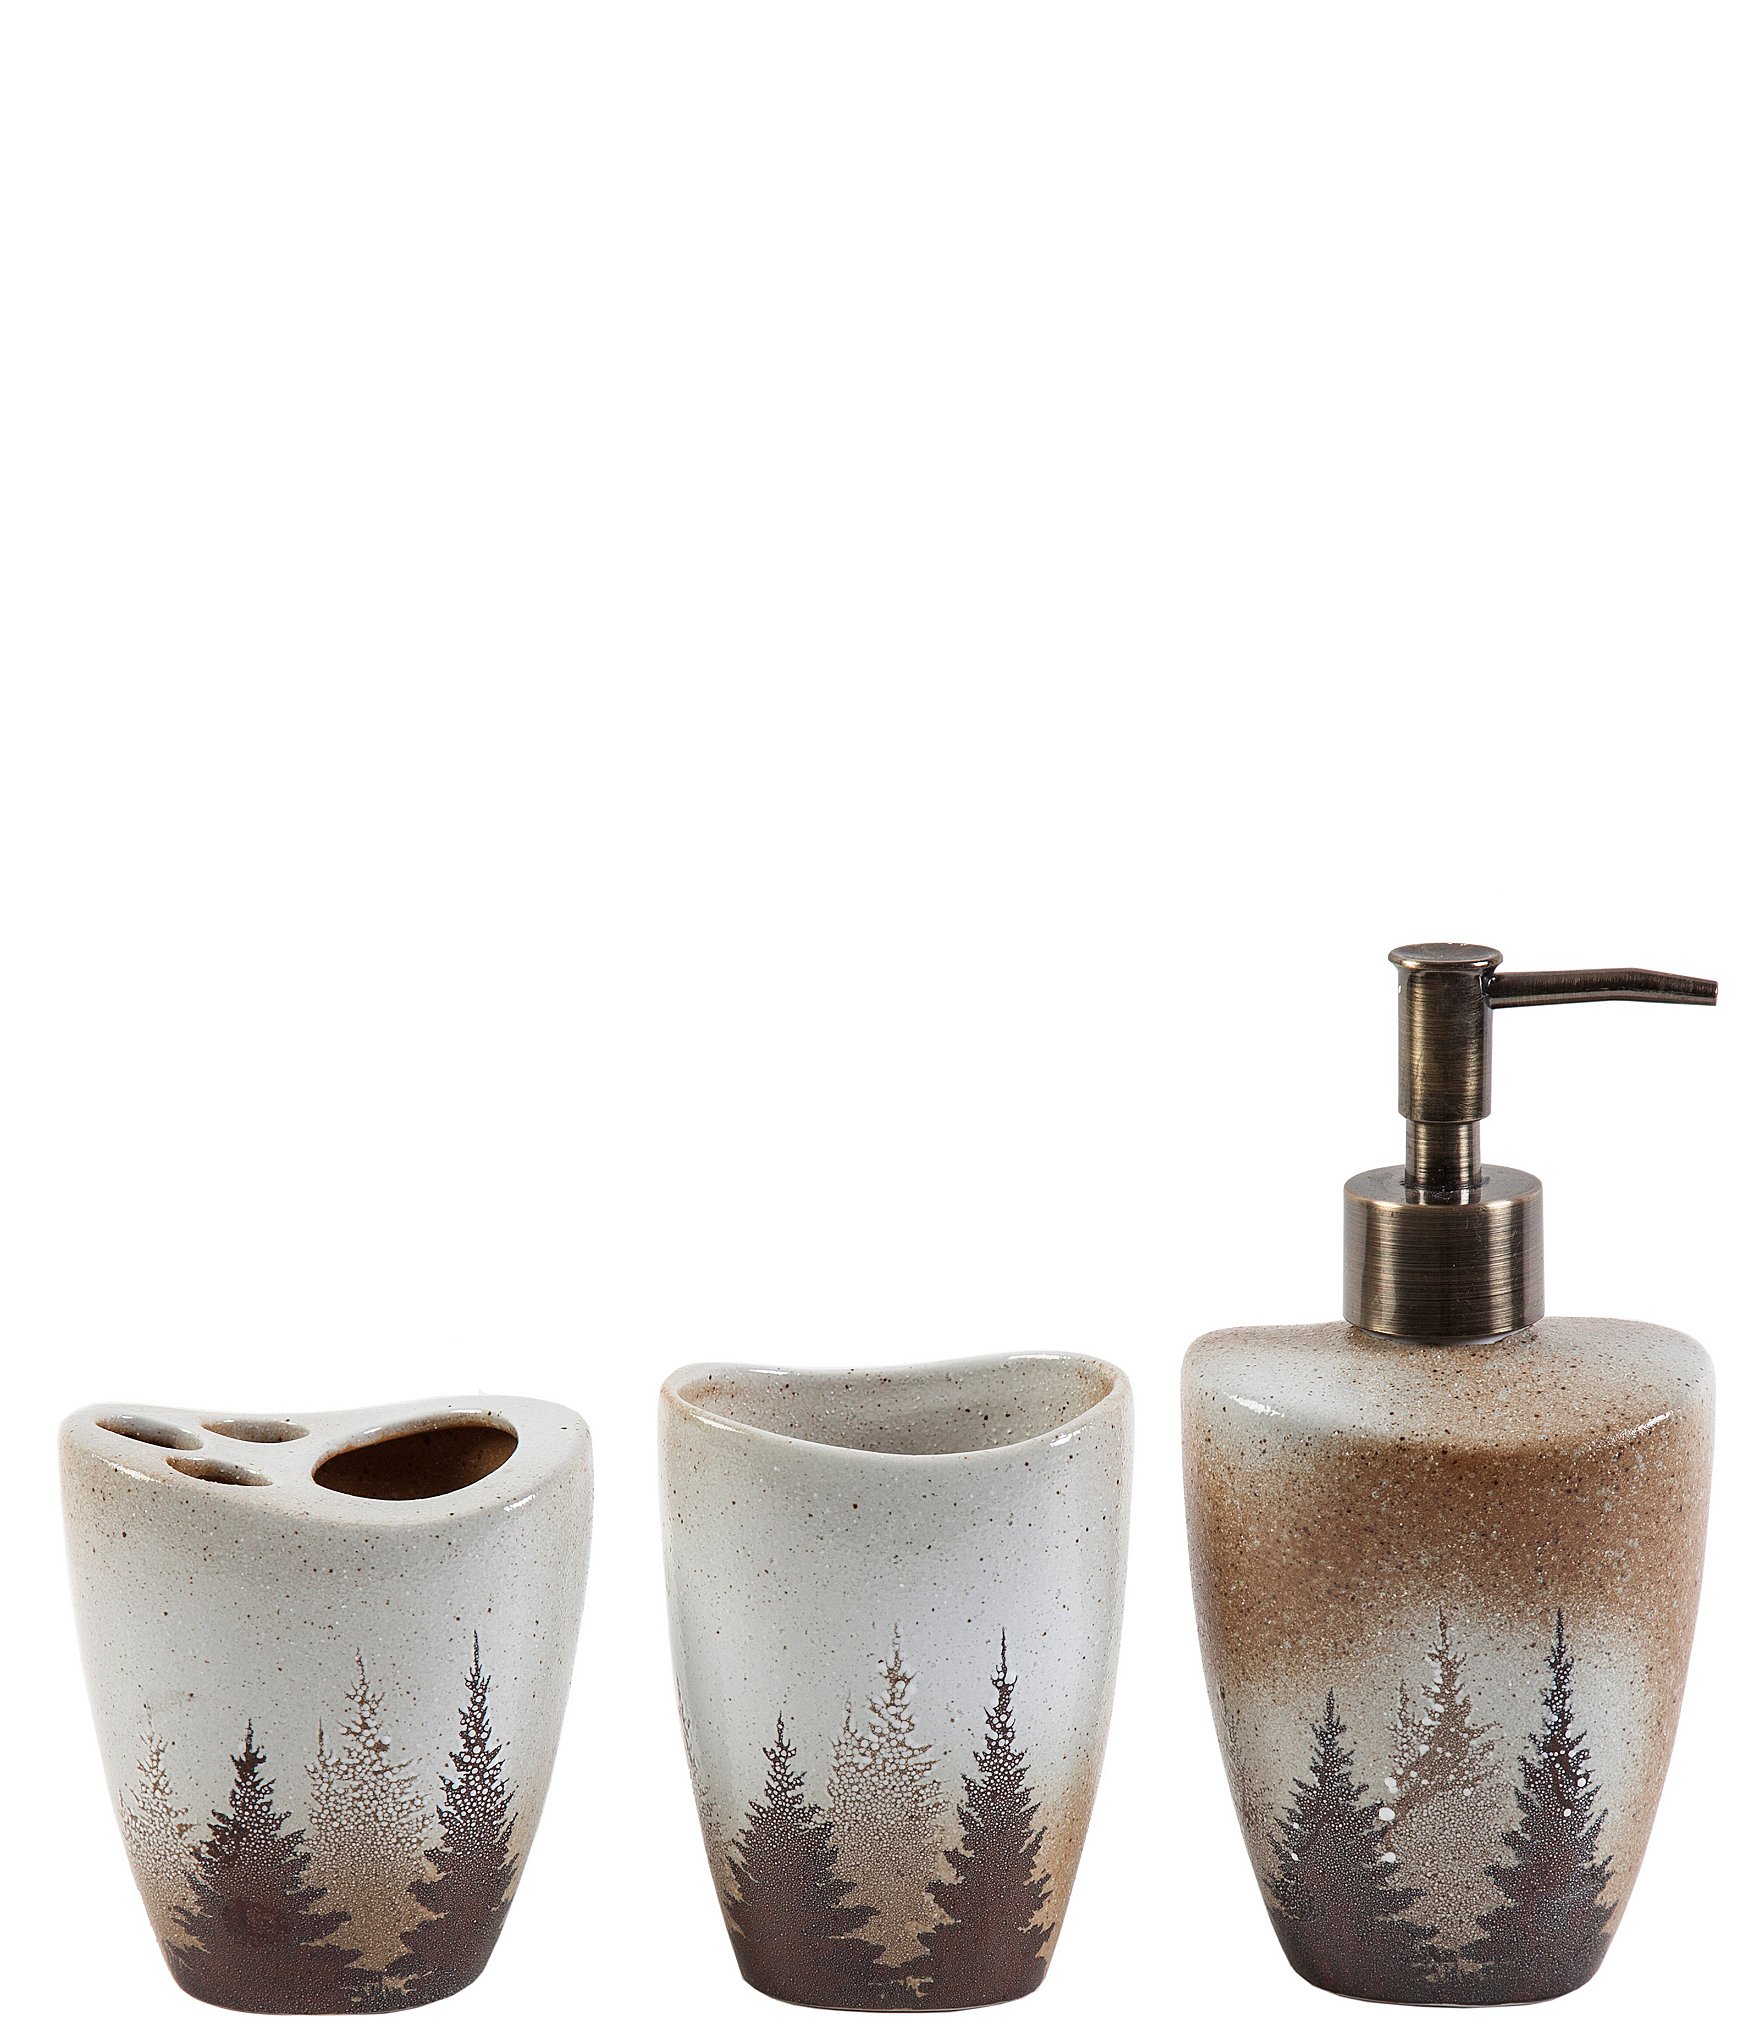 https://dimg.dillards.com/is/image/DillardsZoom/zoom/paseo-road-by-hiend-accents-clearwater-pines-3-piece-countertop-bathroom-accessory-set/00000000_zi_9e733a6a-1c74-45f5-bf43-4d5c16db494e.jpg